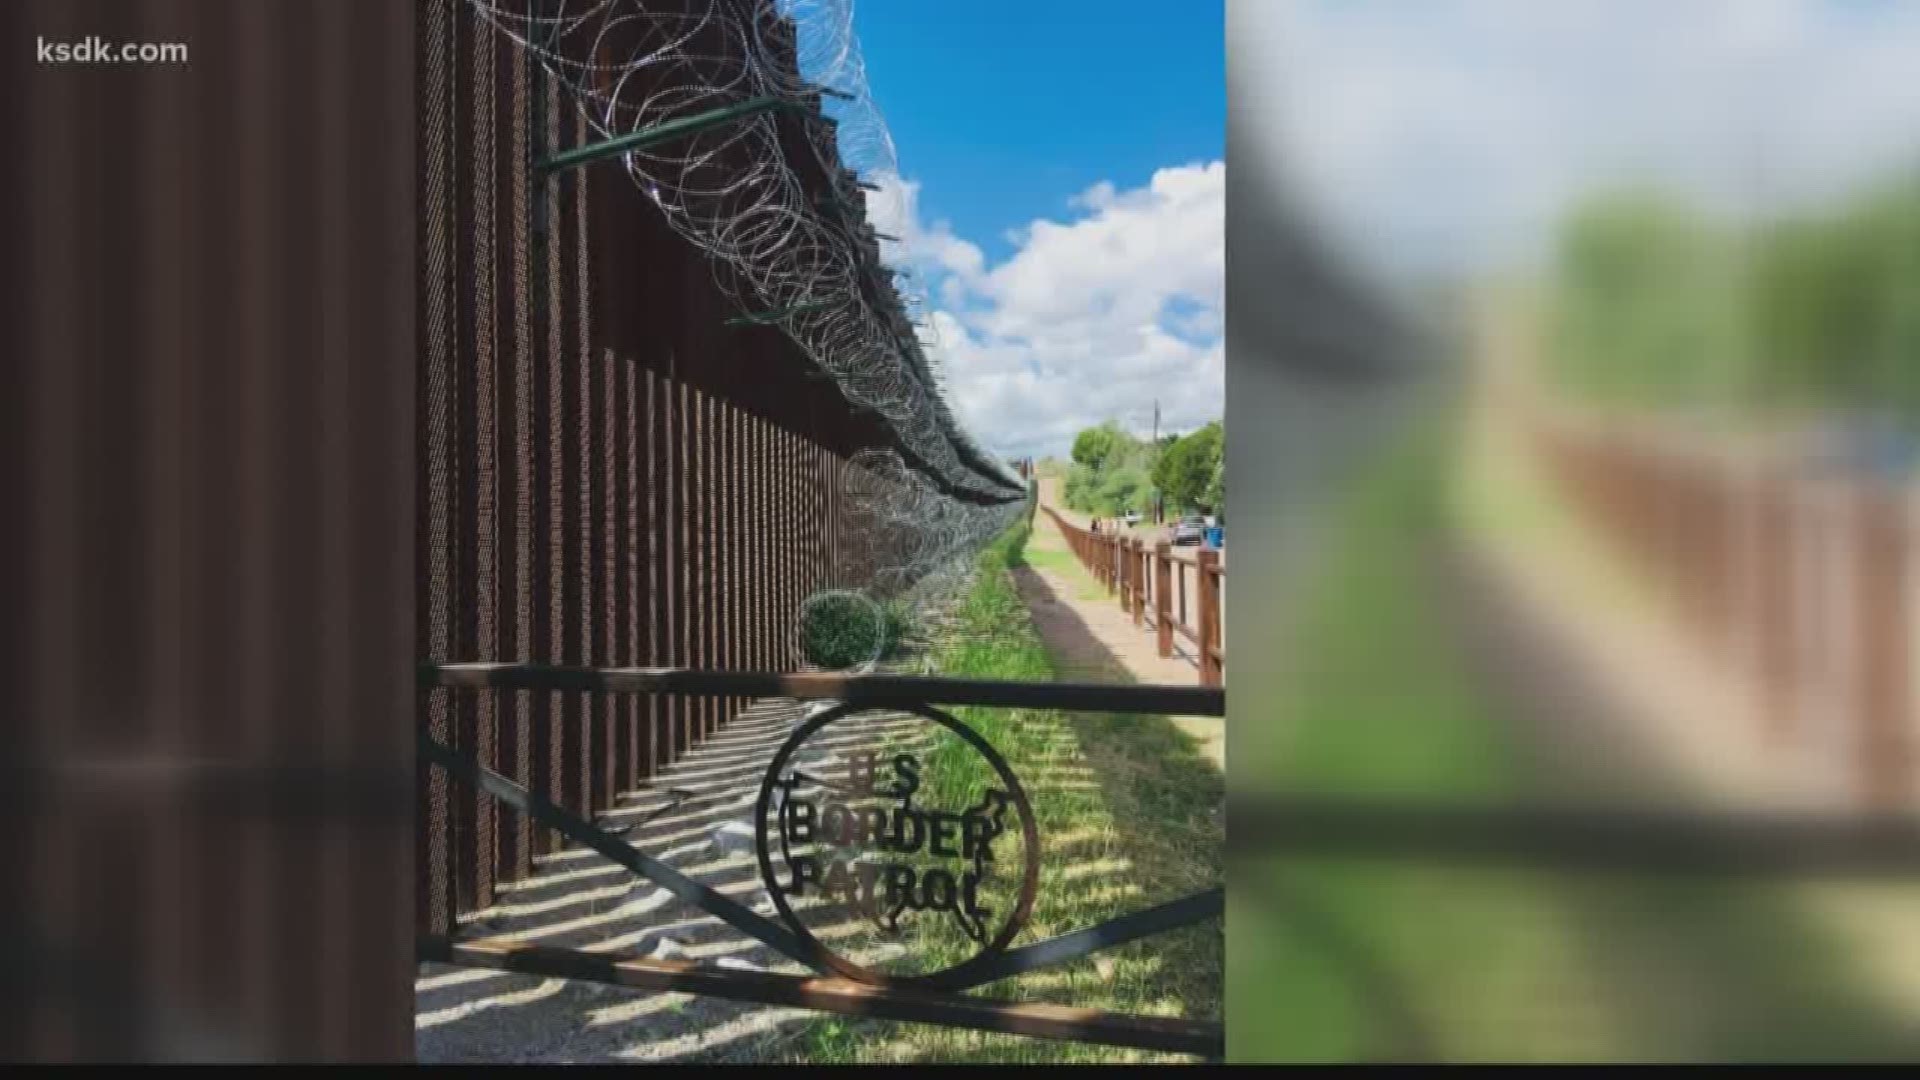 A group from St. Louis visited the Arizona/Mexico border. It was sponsored by the Jewish Council for Public Affairs. Rori Picker Neiss talks about their mission.